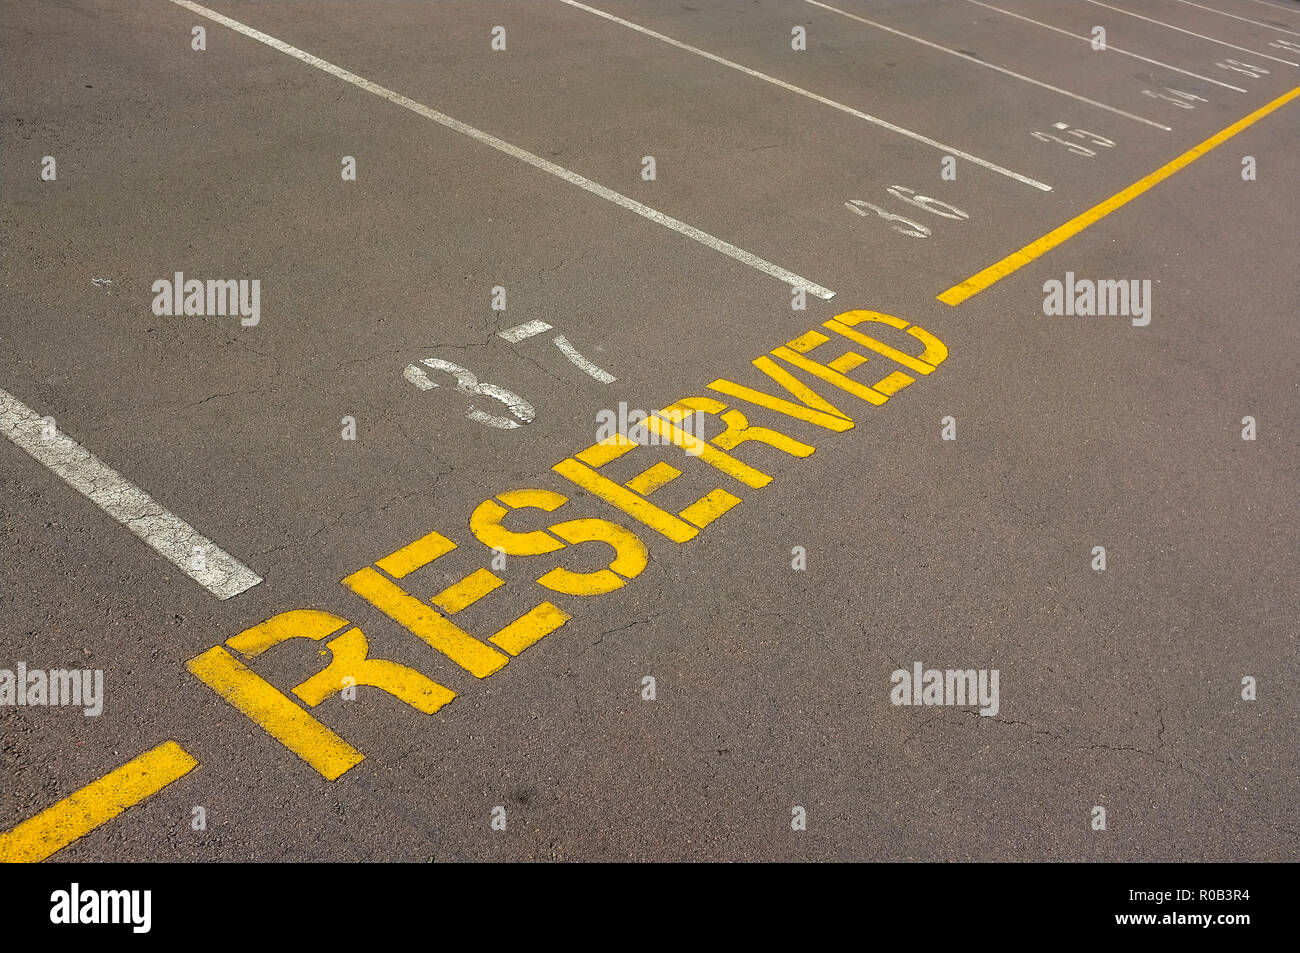 Reserved marking for reserved parking spots. Stock Photo